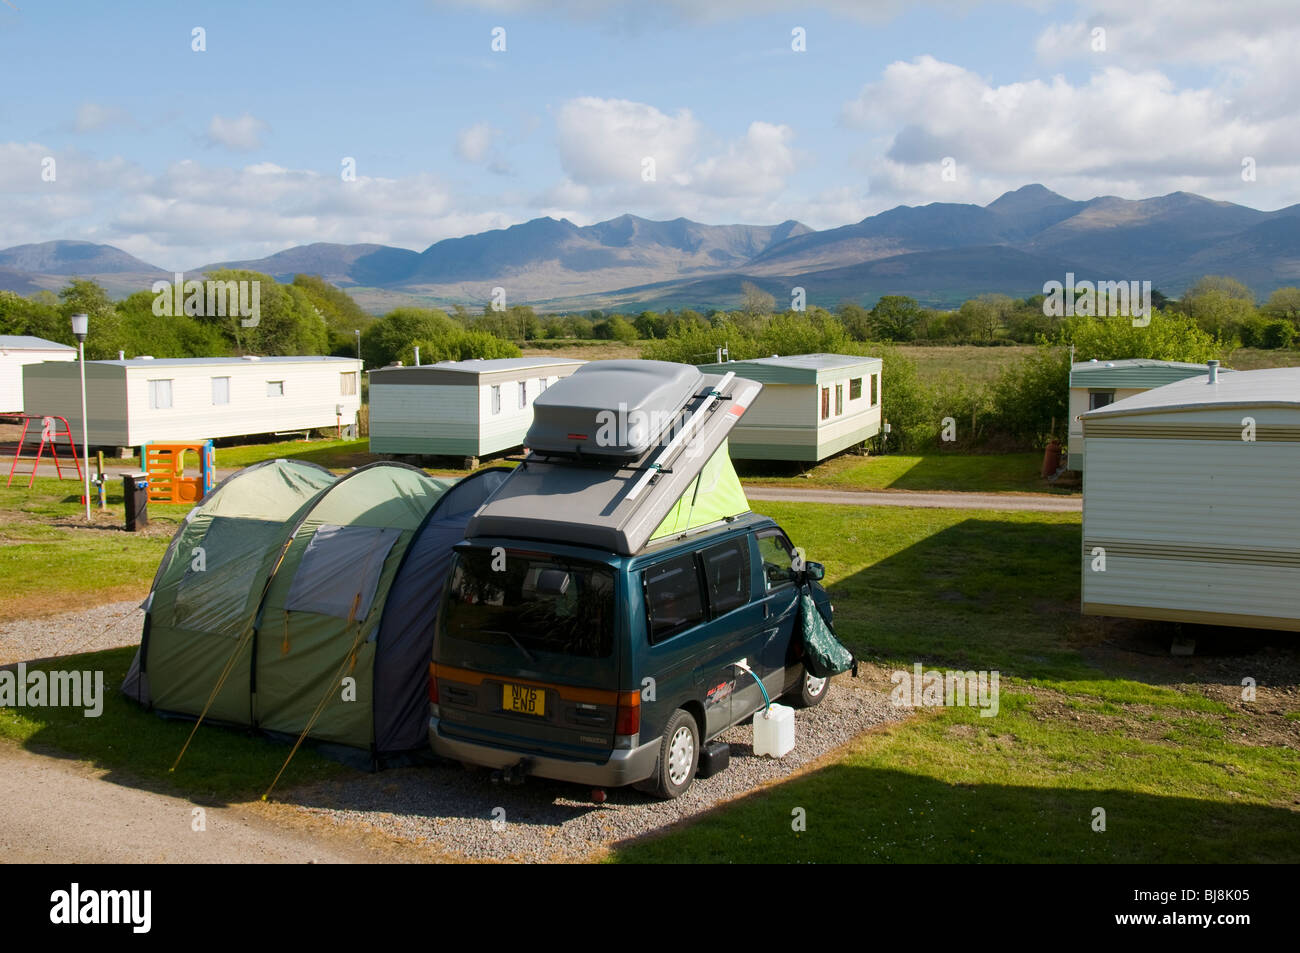 A camp site at Killorglin, Kerry, Ireland, with a view of Carrauntuohil and the MacGillicuddy's Reeks mountain range. Stock Photo